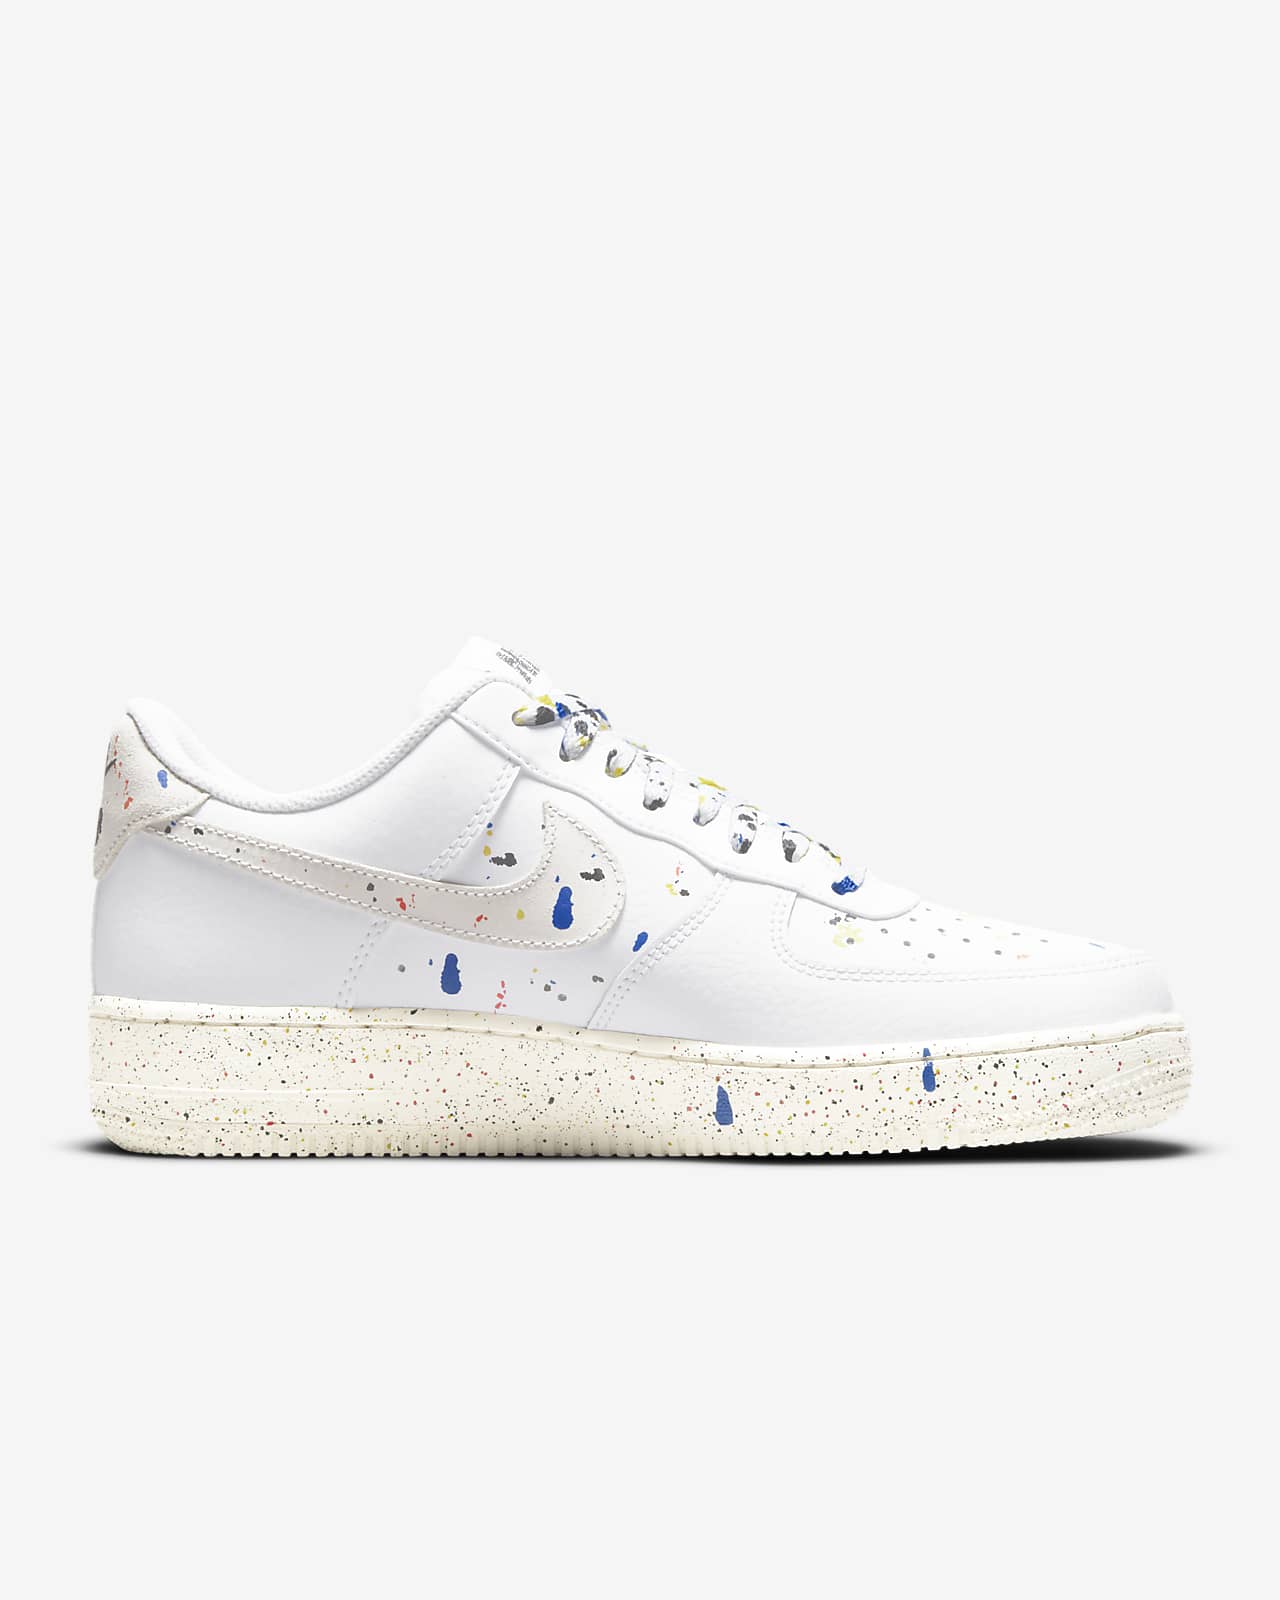 nike air force 1 07 lv8 shoes